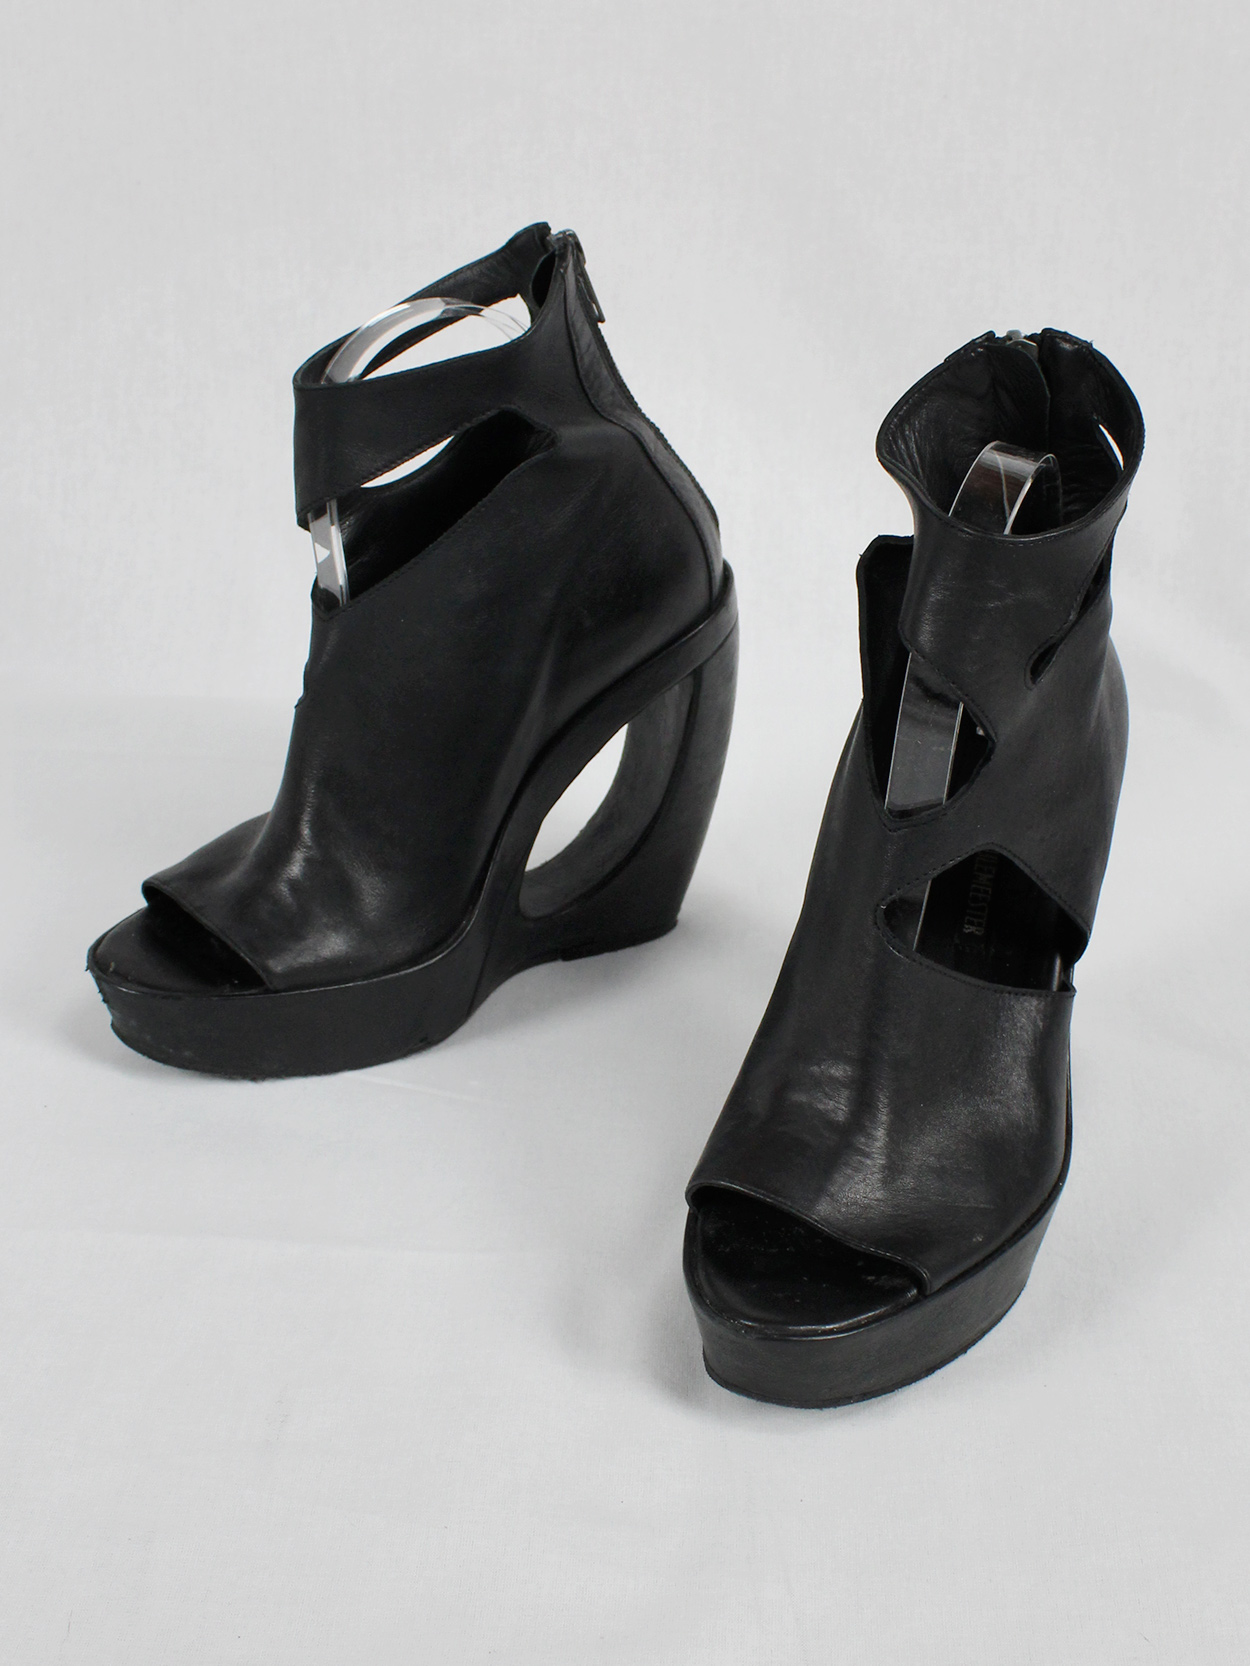 vaniitas Ann Demeulemeester black boots with cut-out curved heel fall 2013 (9)